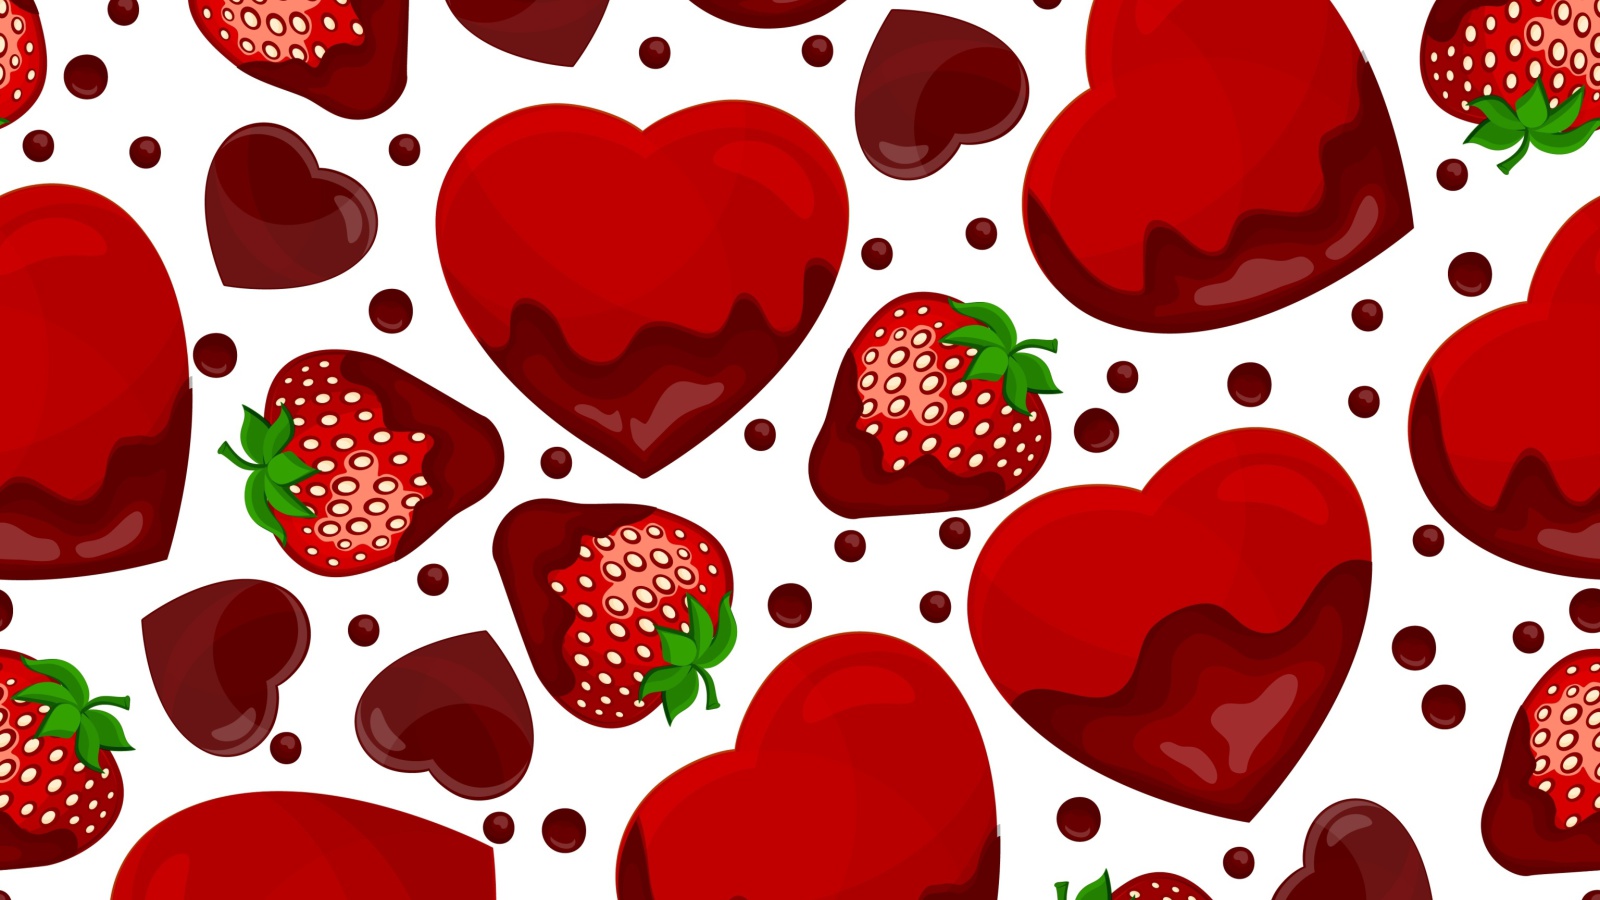 Strawberry and Hearts wallpaper 1600x900